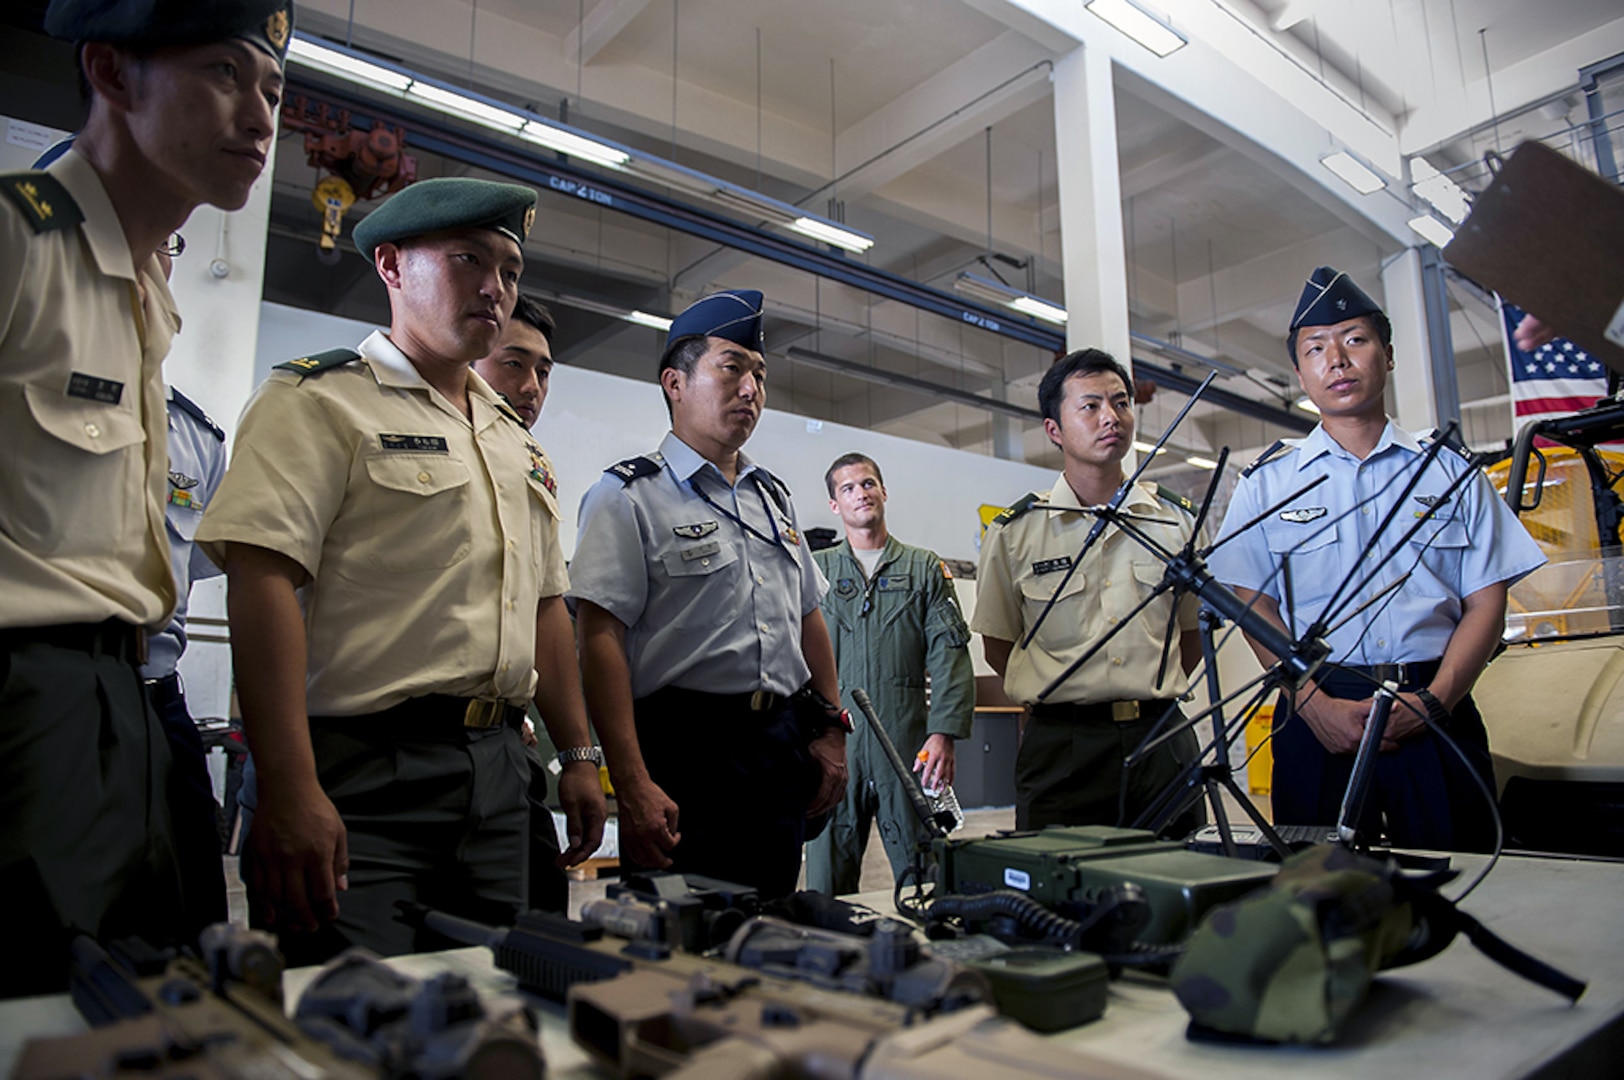 Japan Air Self-Defense Force and Japan Ground Self-Defense Force members attending the 52nd Joint Tactical Operations Course get a briefing about some of the equipment the 320th Special Tactics Squadron uses during a tour of the 353rd Special Operations Squadron June 21, 2016, at Kadena Air Base, Japan. Members of JGSDF and JASDF bond with their U.S. Air Force counterparts as they discuss the similarities and differences in the equipment they use and the missions they train for. 